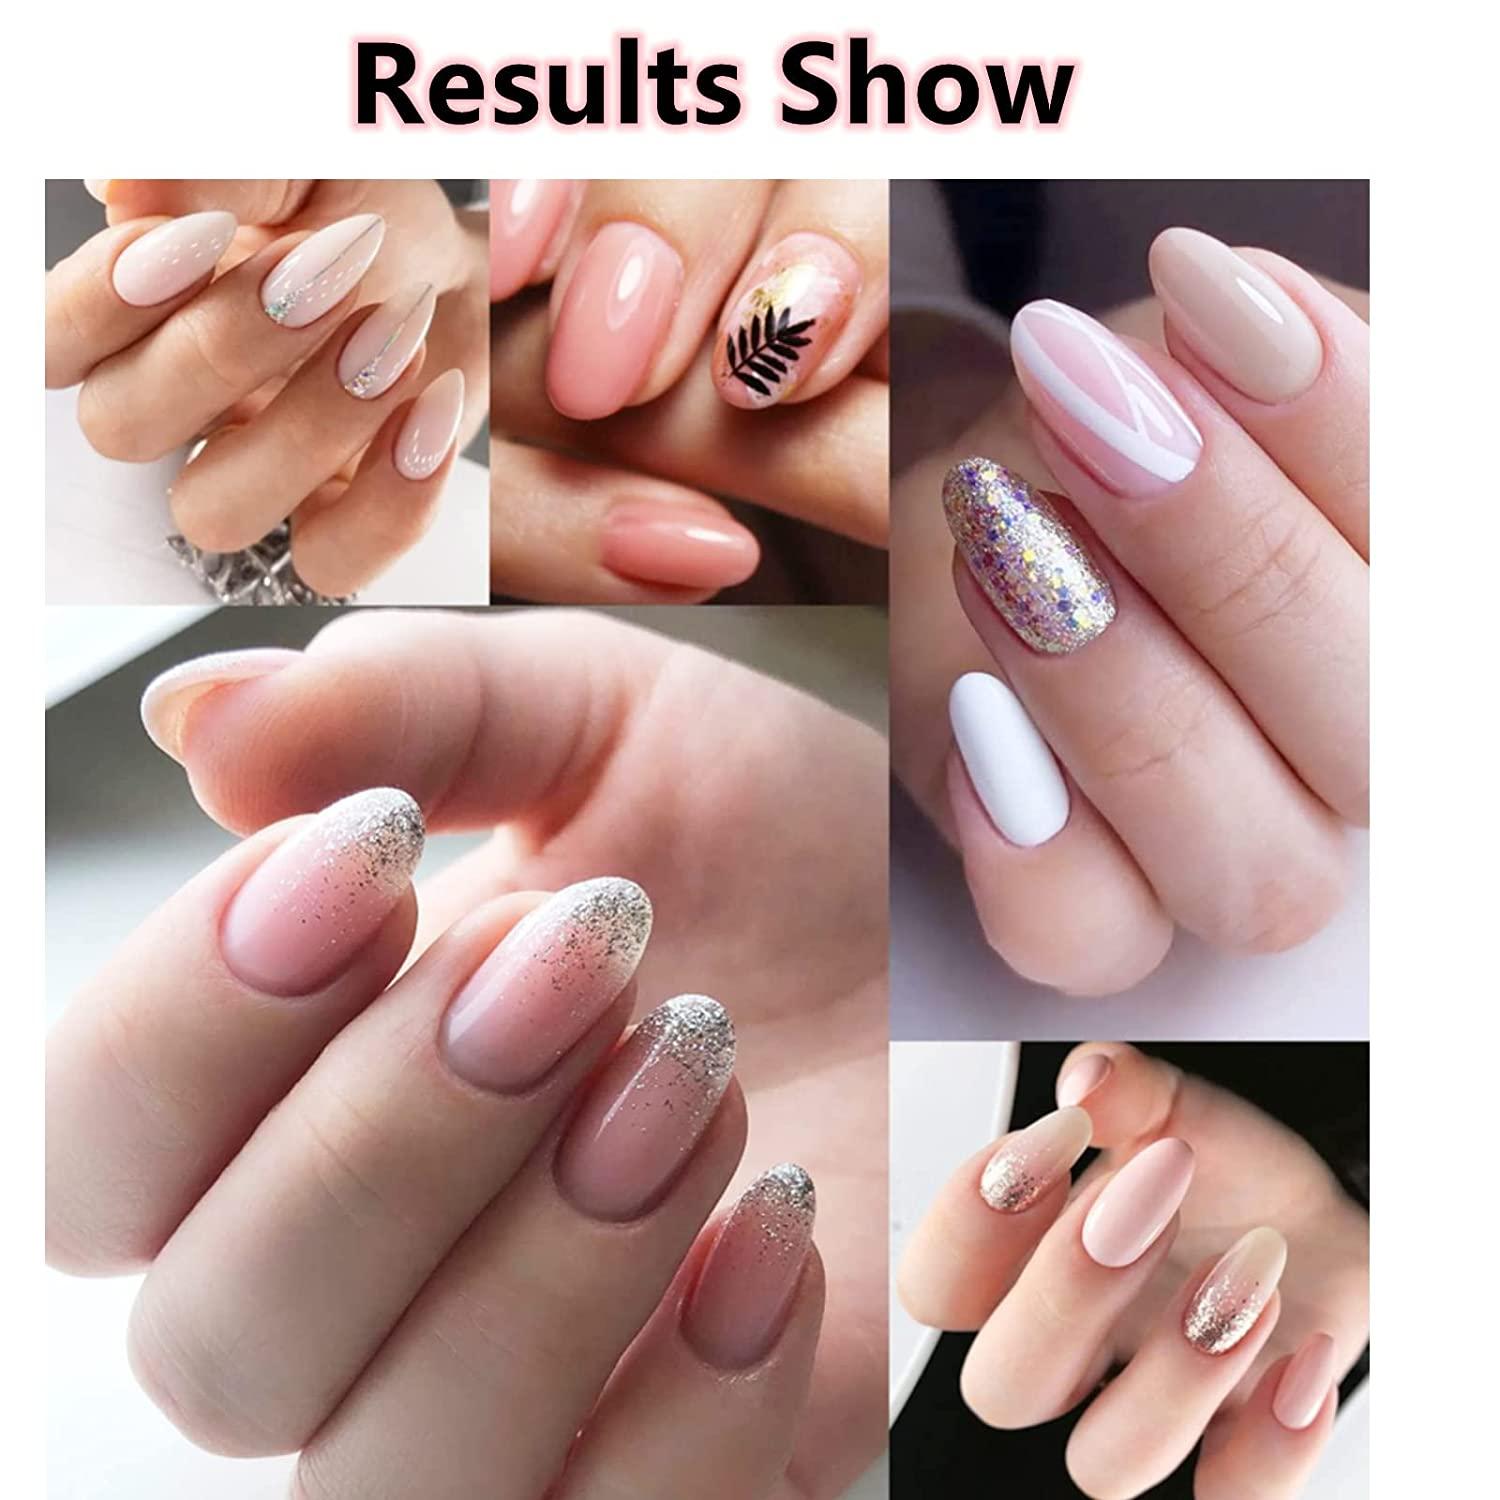 What is the difference between gel and acrylic nails?